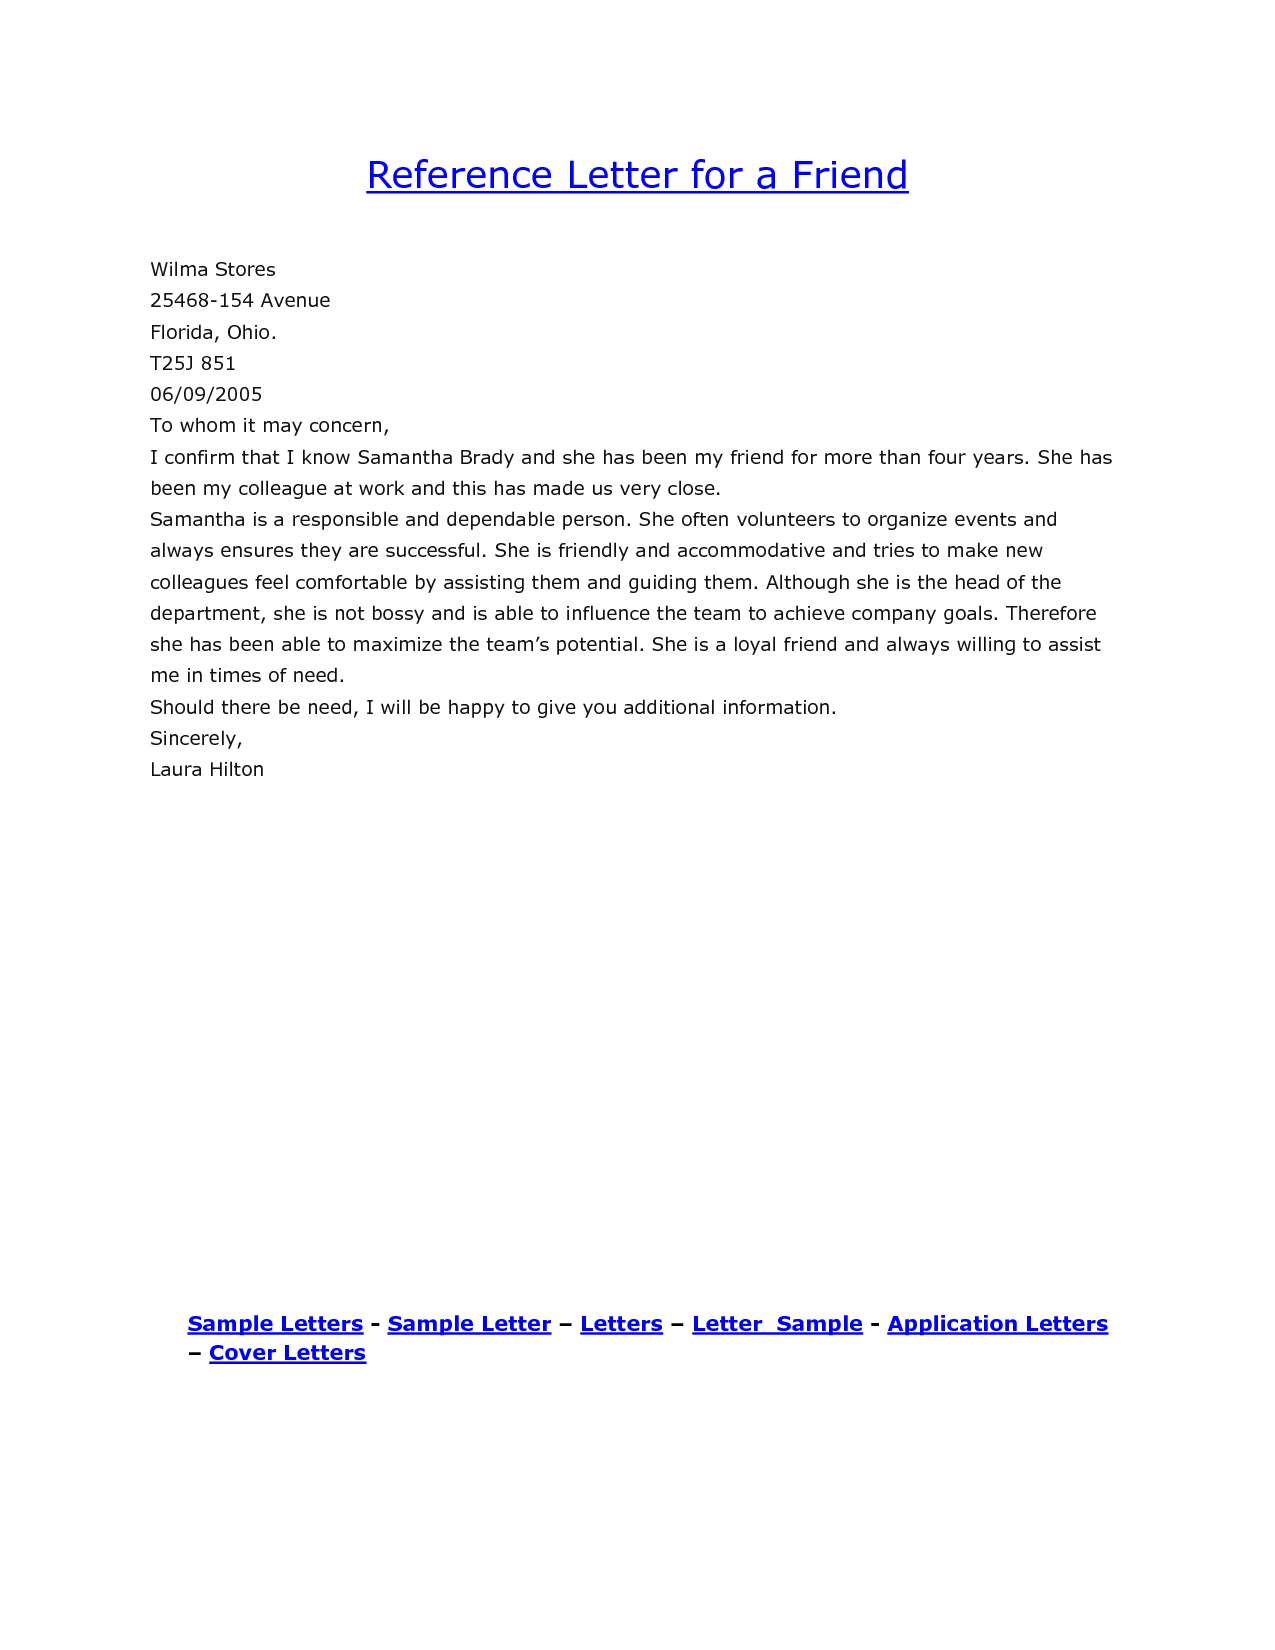 Reference Letter Sample For A Friend Yahoo Search Results throughout measurements 1275 X 1650